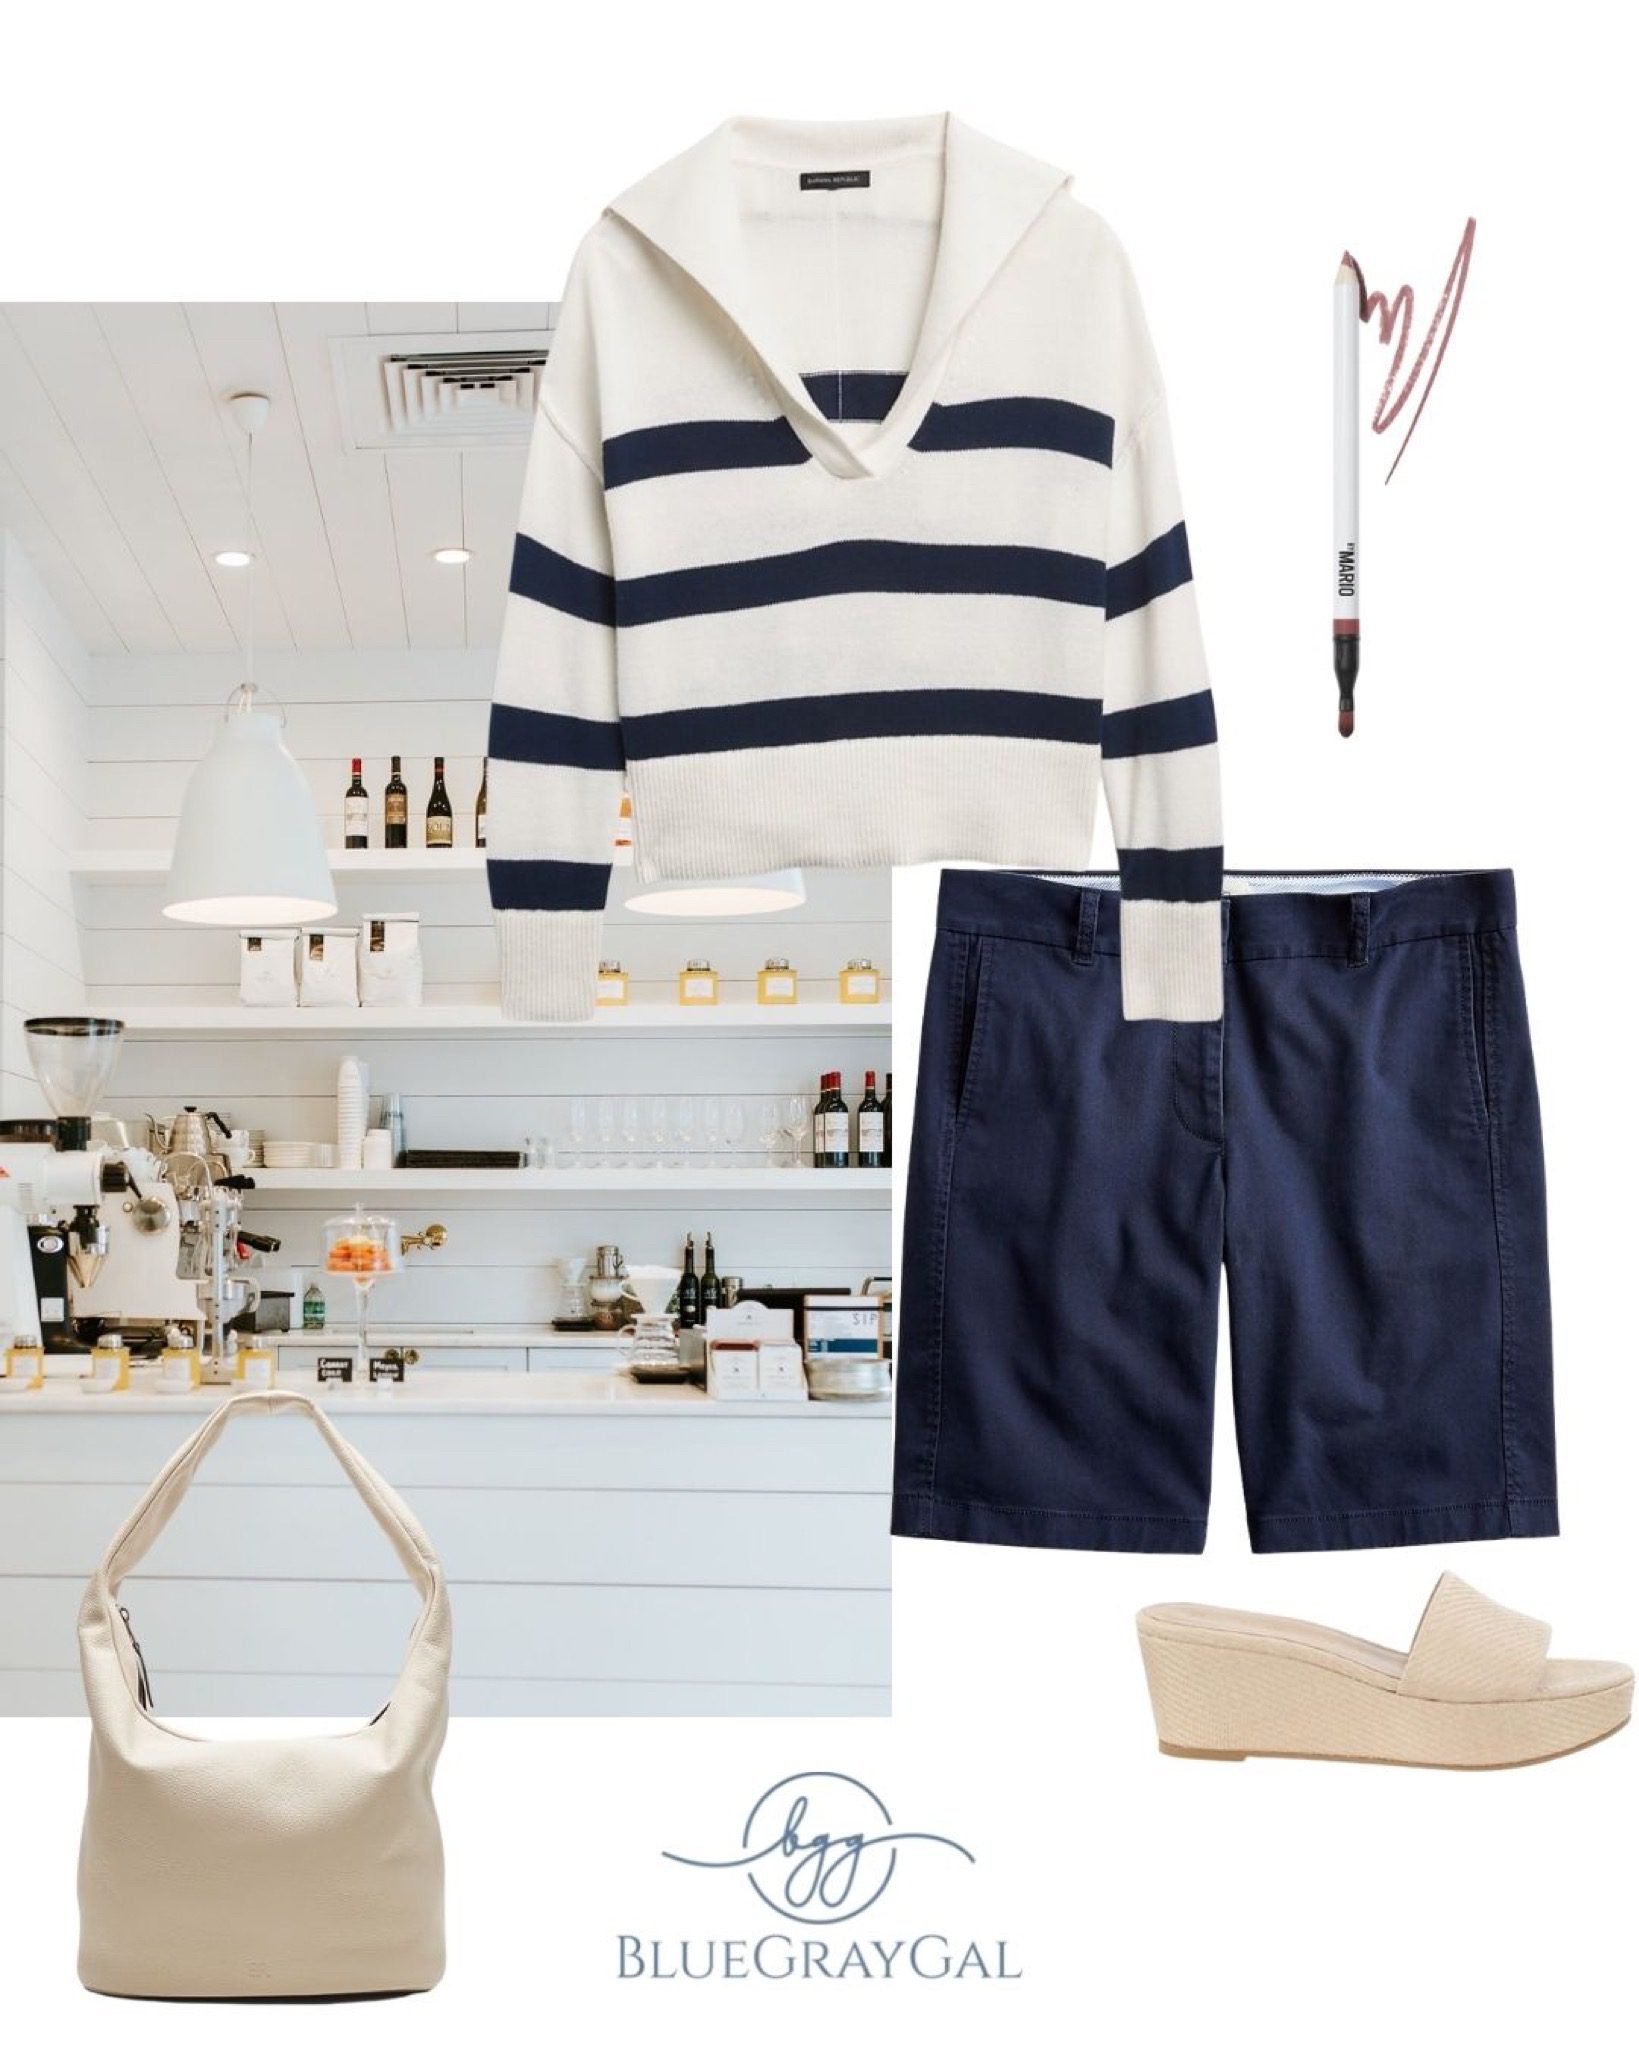 Blue and white striped nautical sweater and blue summer shorts.